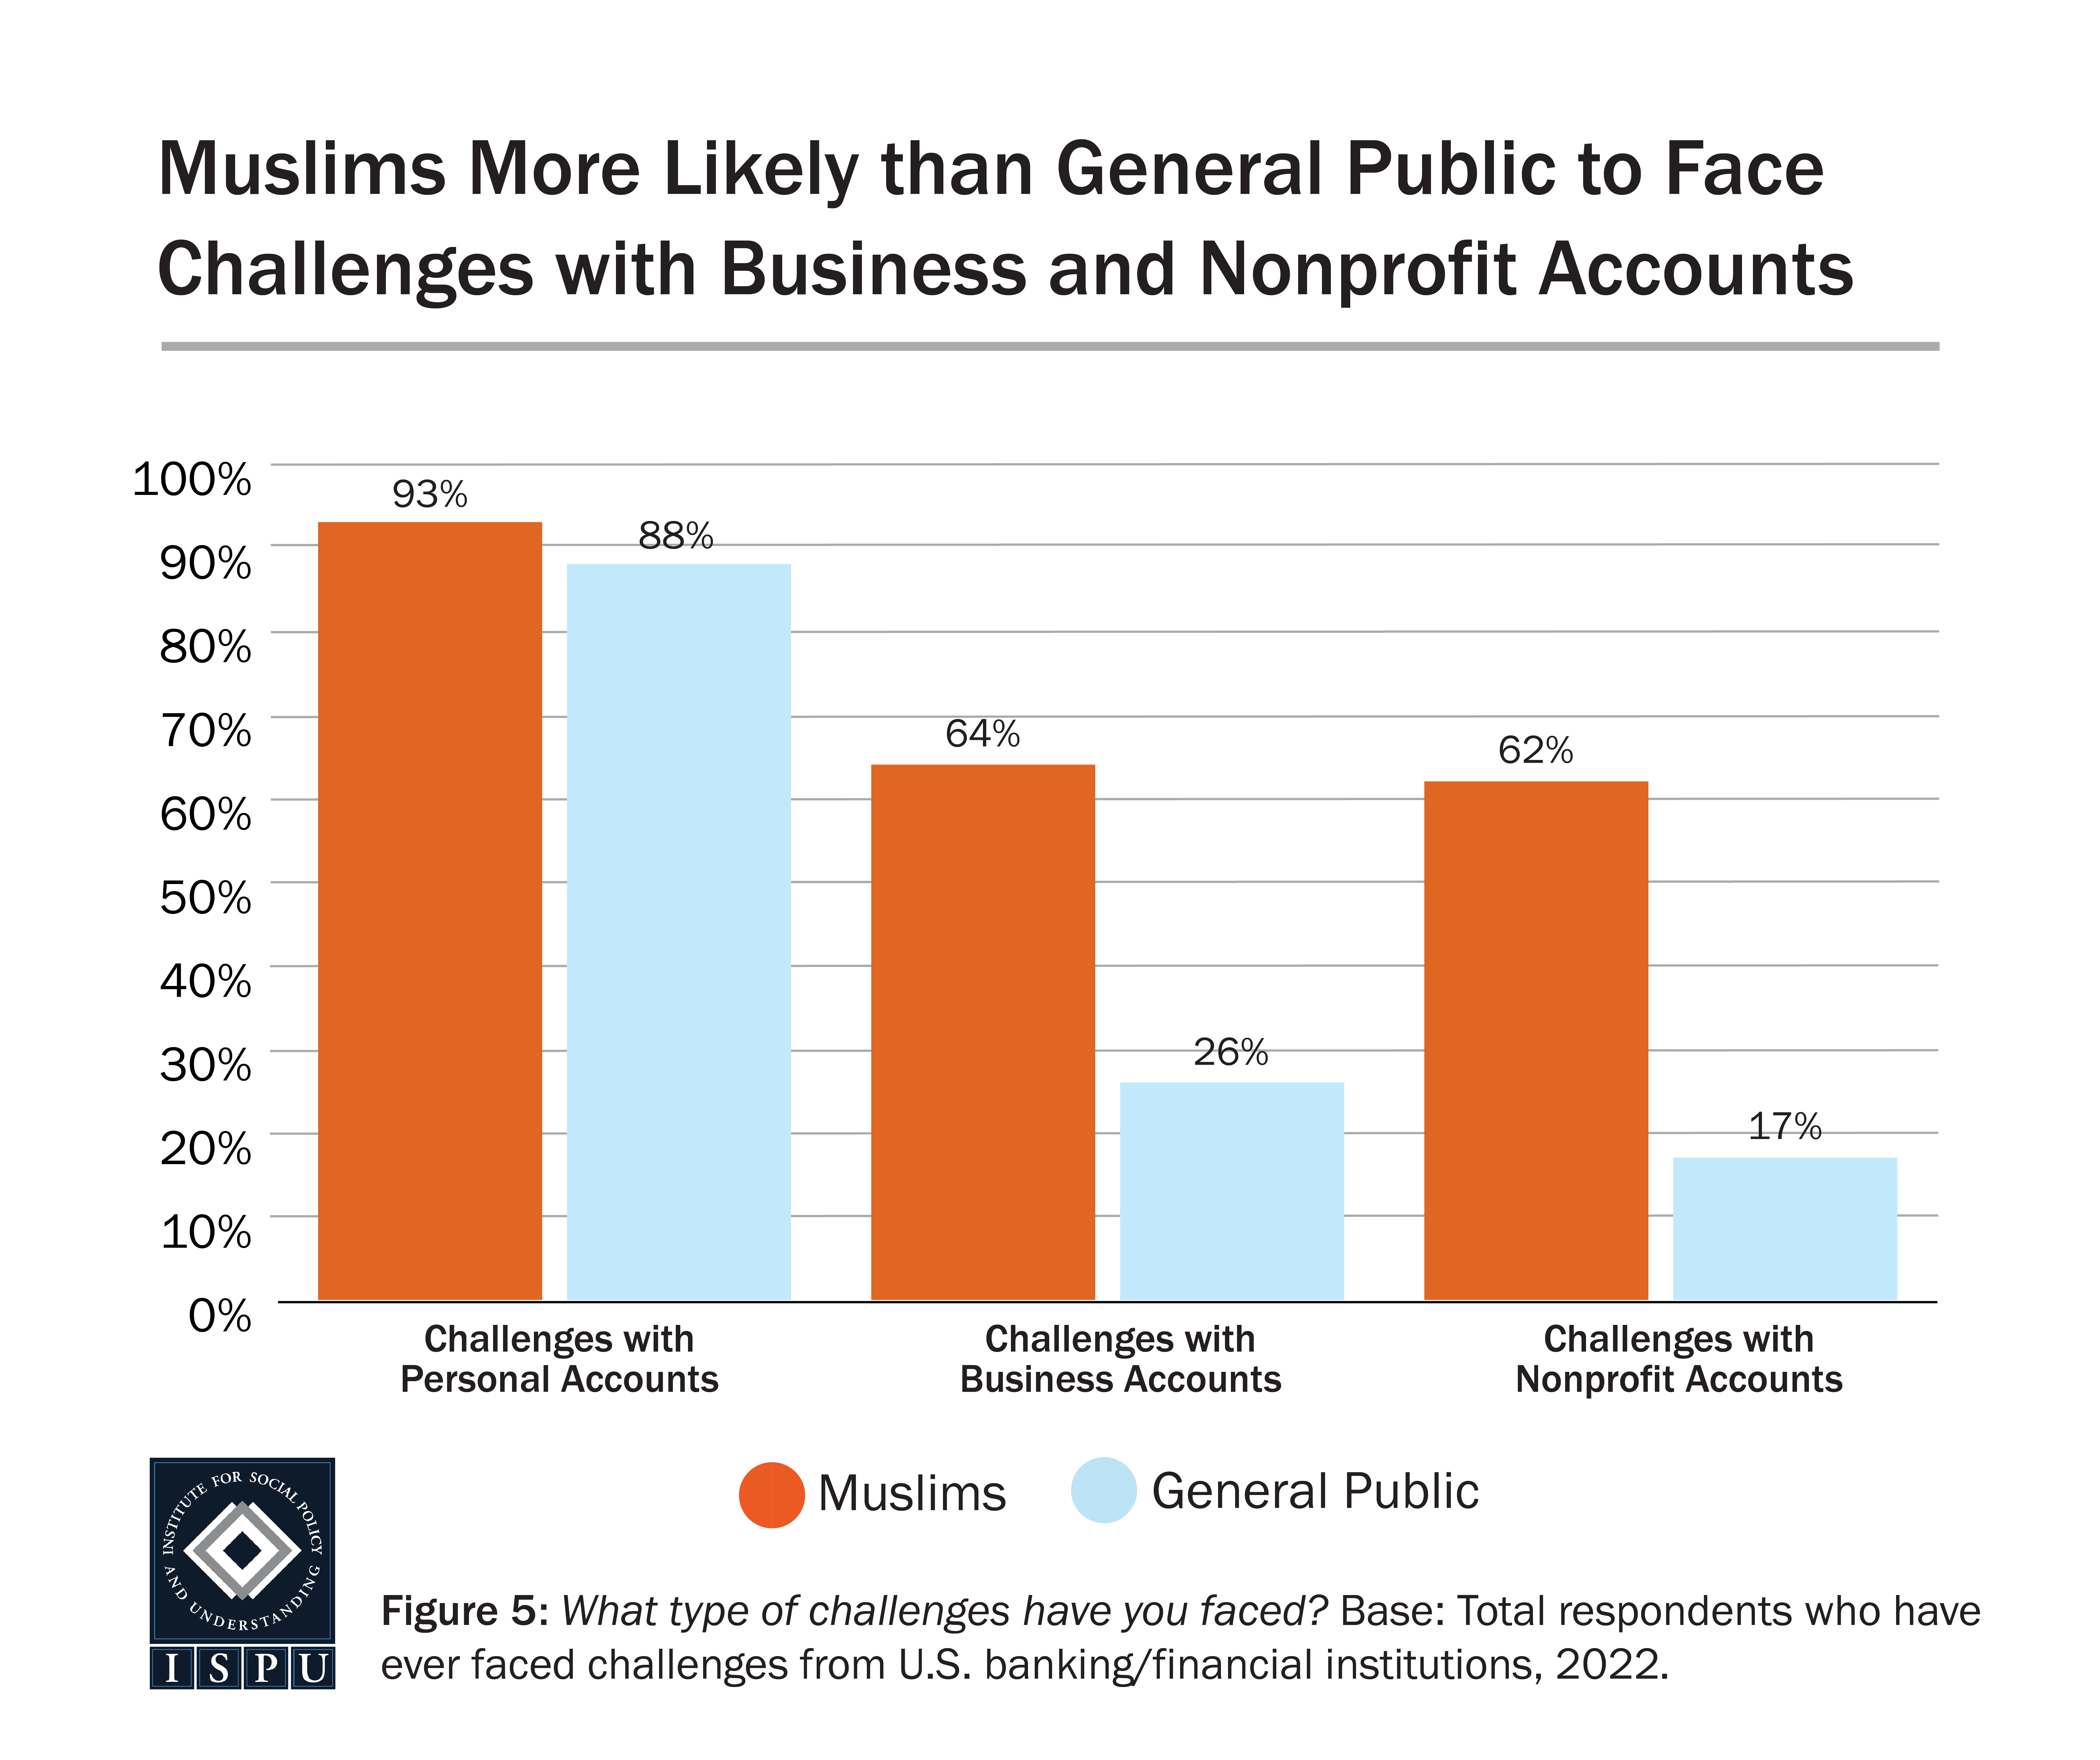 A bar graph showing the proportion of Muslims and the general public who faced banking challenges with personal accounts, business accounts, and nonprofit accounts.